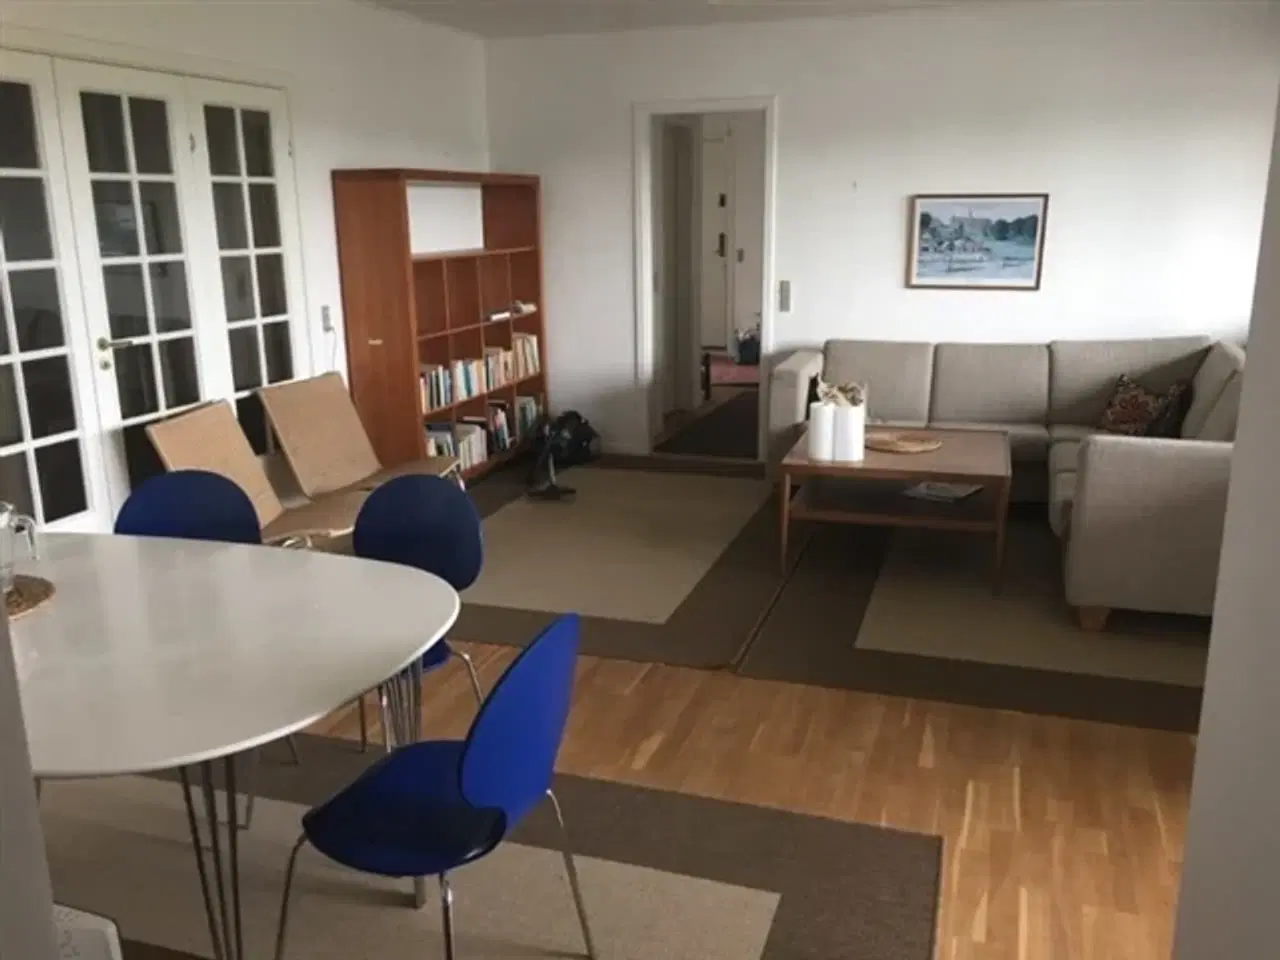 Billede 1 - 1 room available in 4-room apartment for students and/or professionals  - Vedbæk - Copenhagen